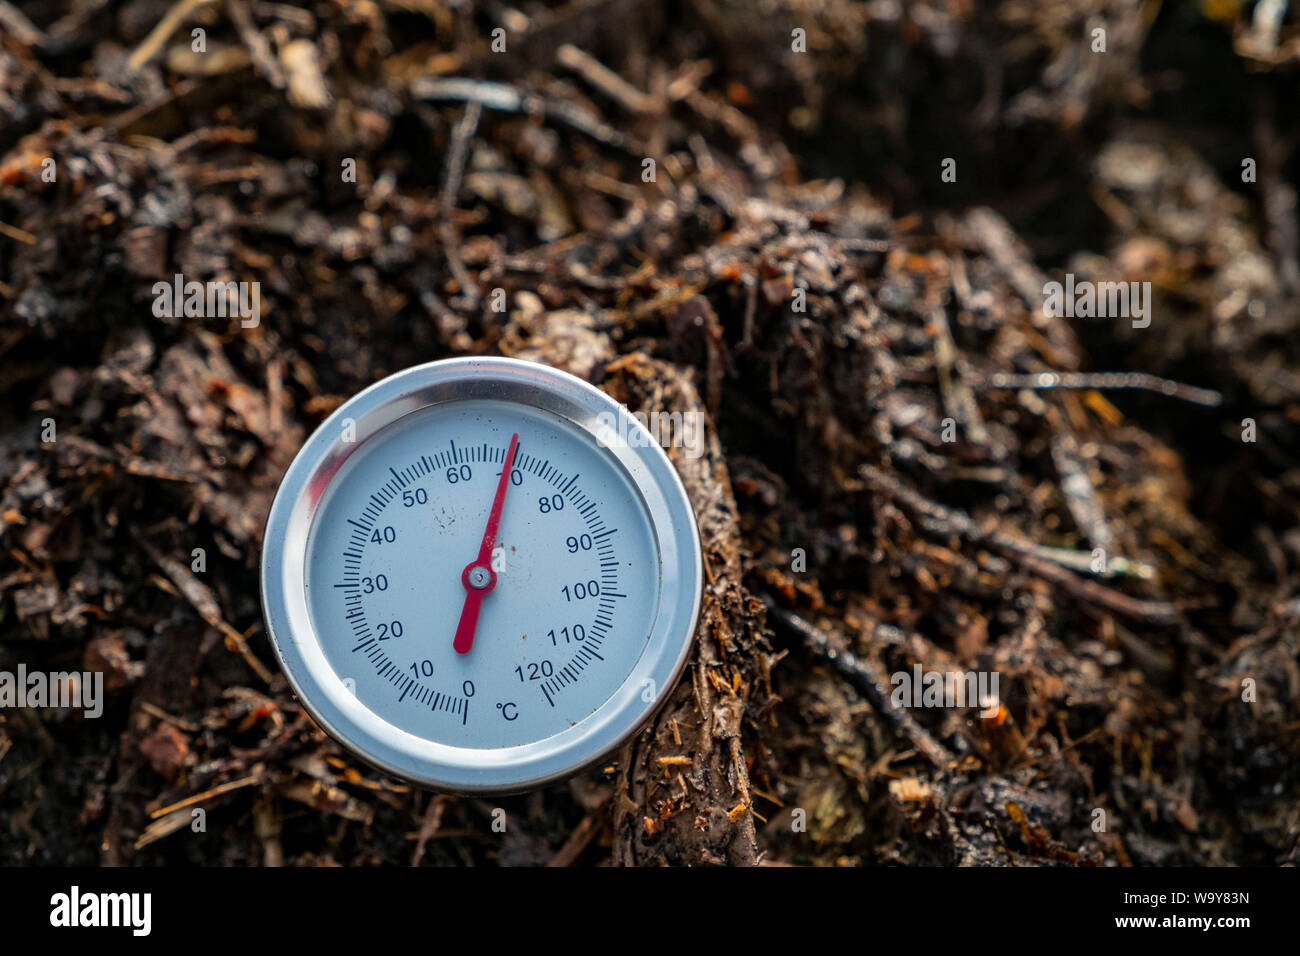 Compost thermometer reading a measurement of almost 70 degrees Celsius. Stock Photo